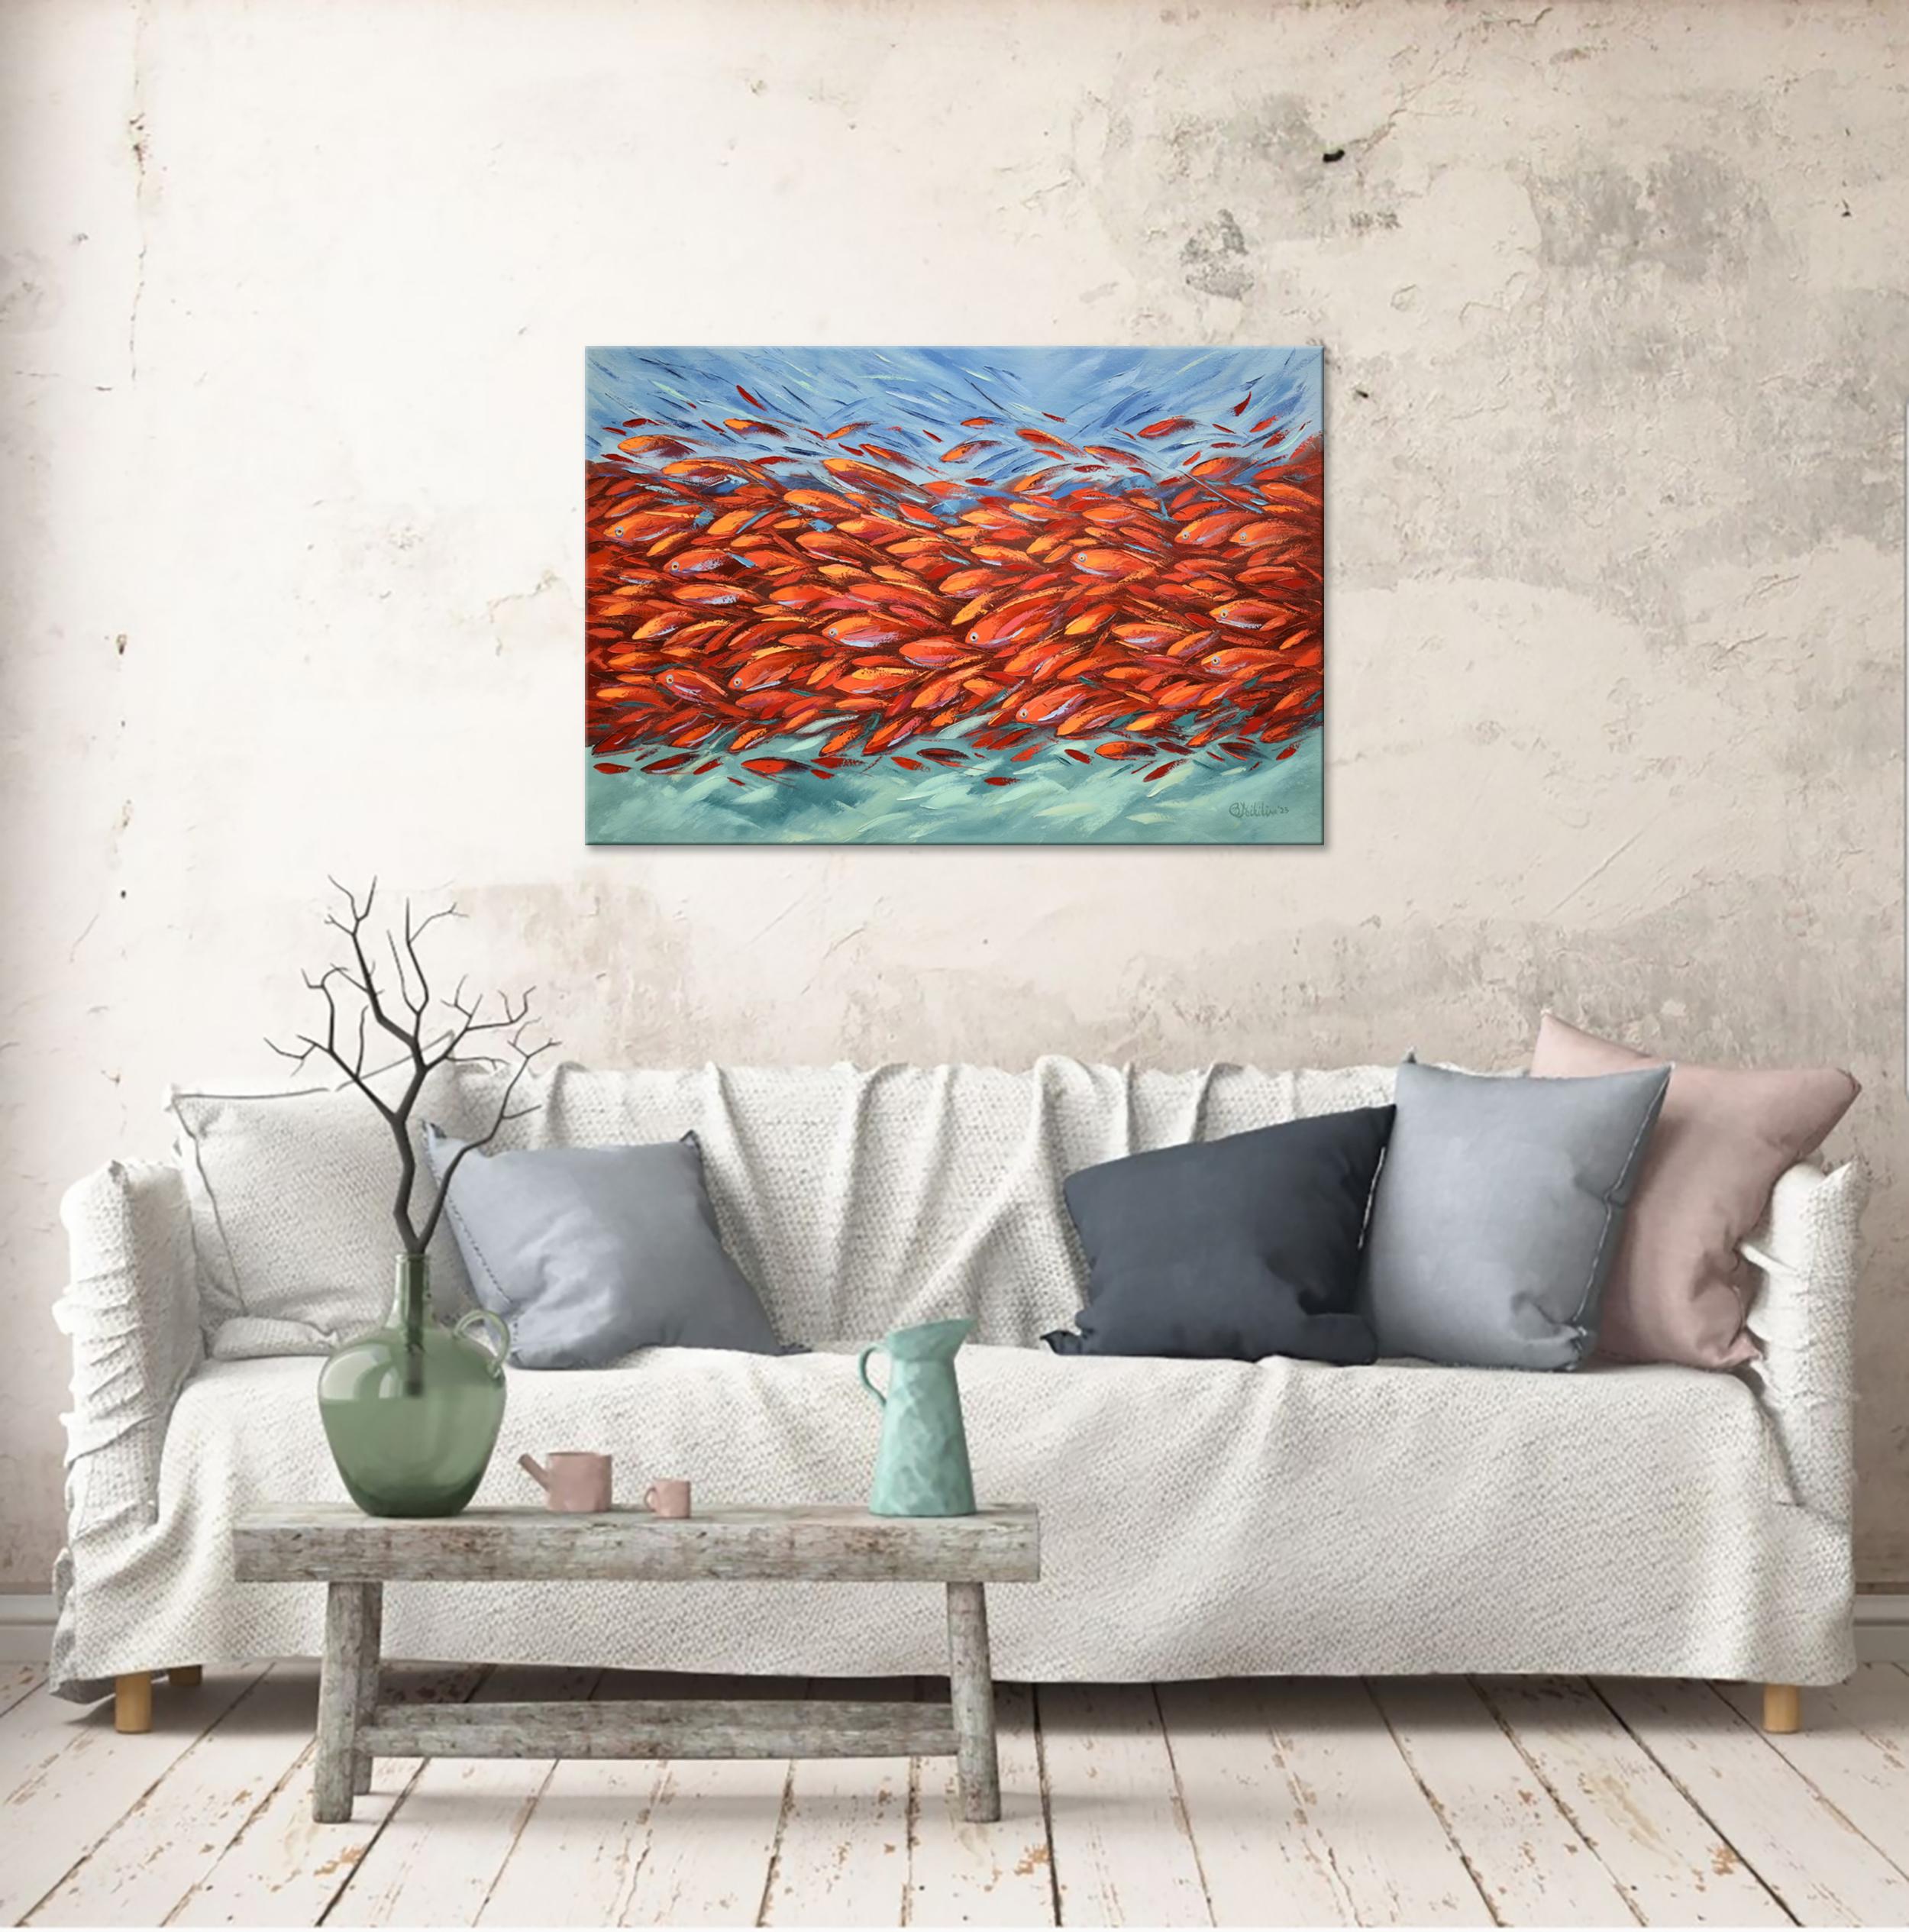 Red Fish Painting Original Sea Life Fish Artwork Ocean Art Impasto Painting

* Title: Red Fish, underwater Wall Art
* Size: 96x67cm (unstretched size 104x76cm)
* Materials: oil, cotton canvas, palette knife
* Shipping: rolled in tube, gallery